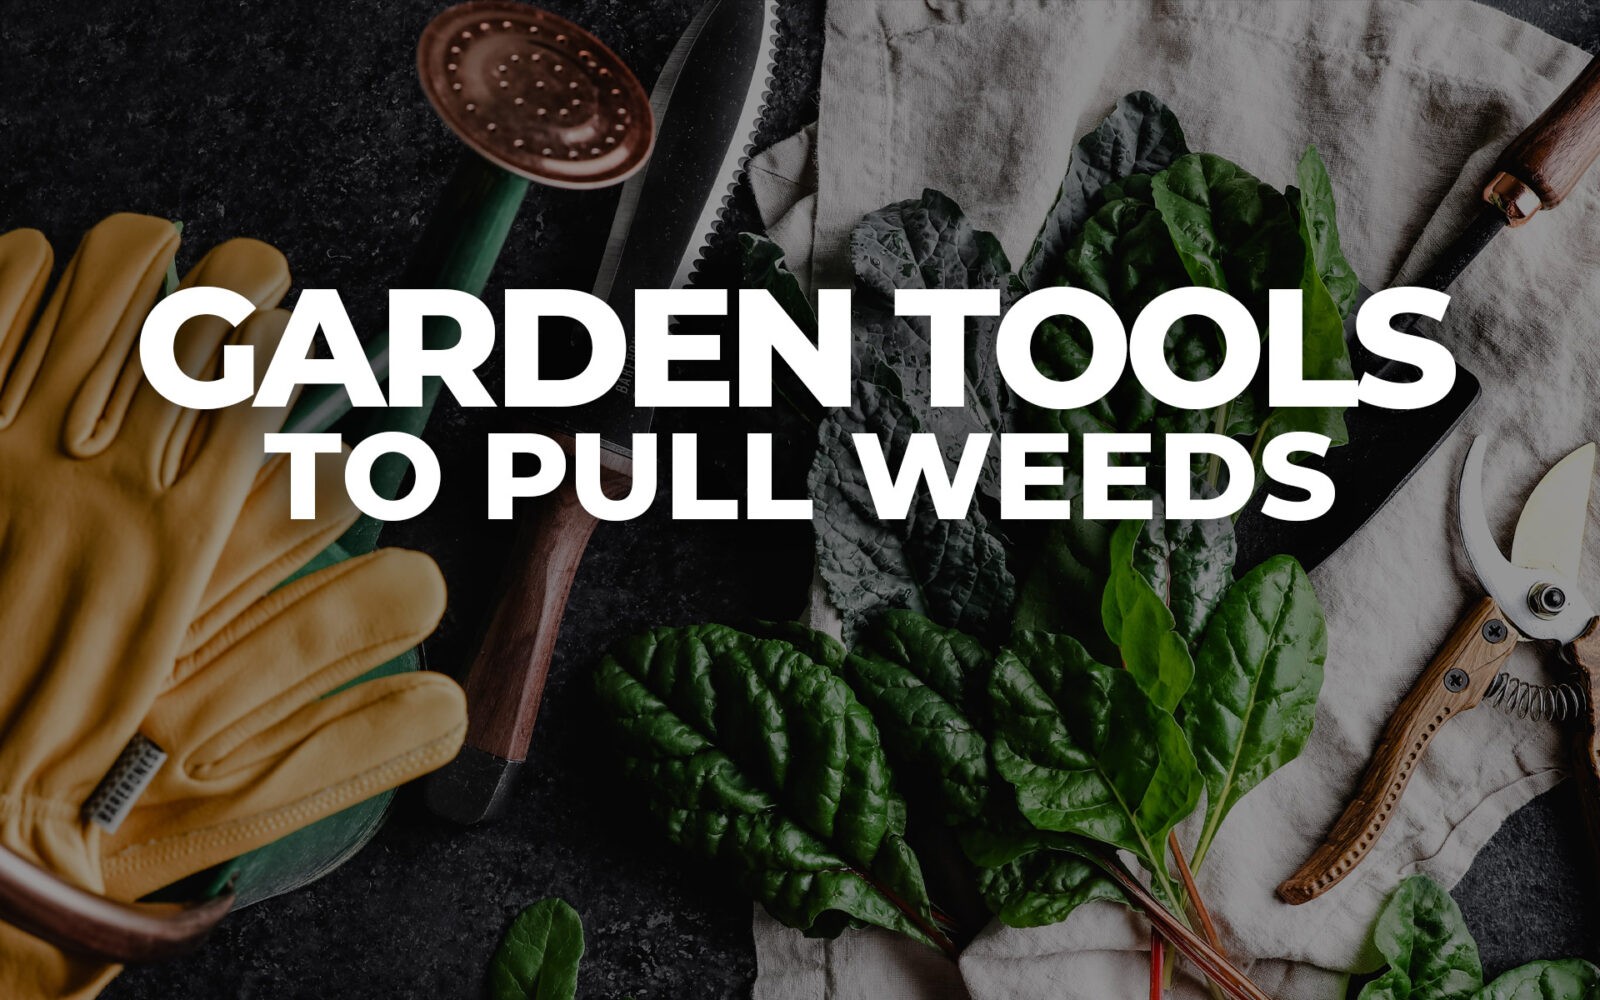 Our most used garden tools to pull weeds